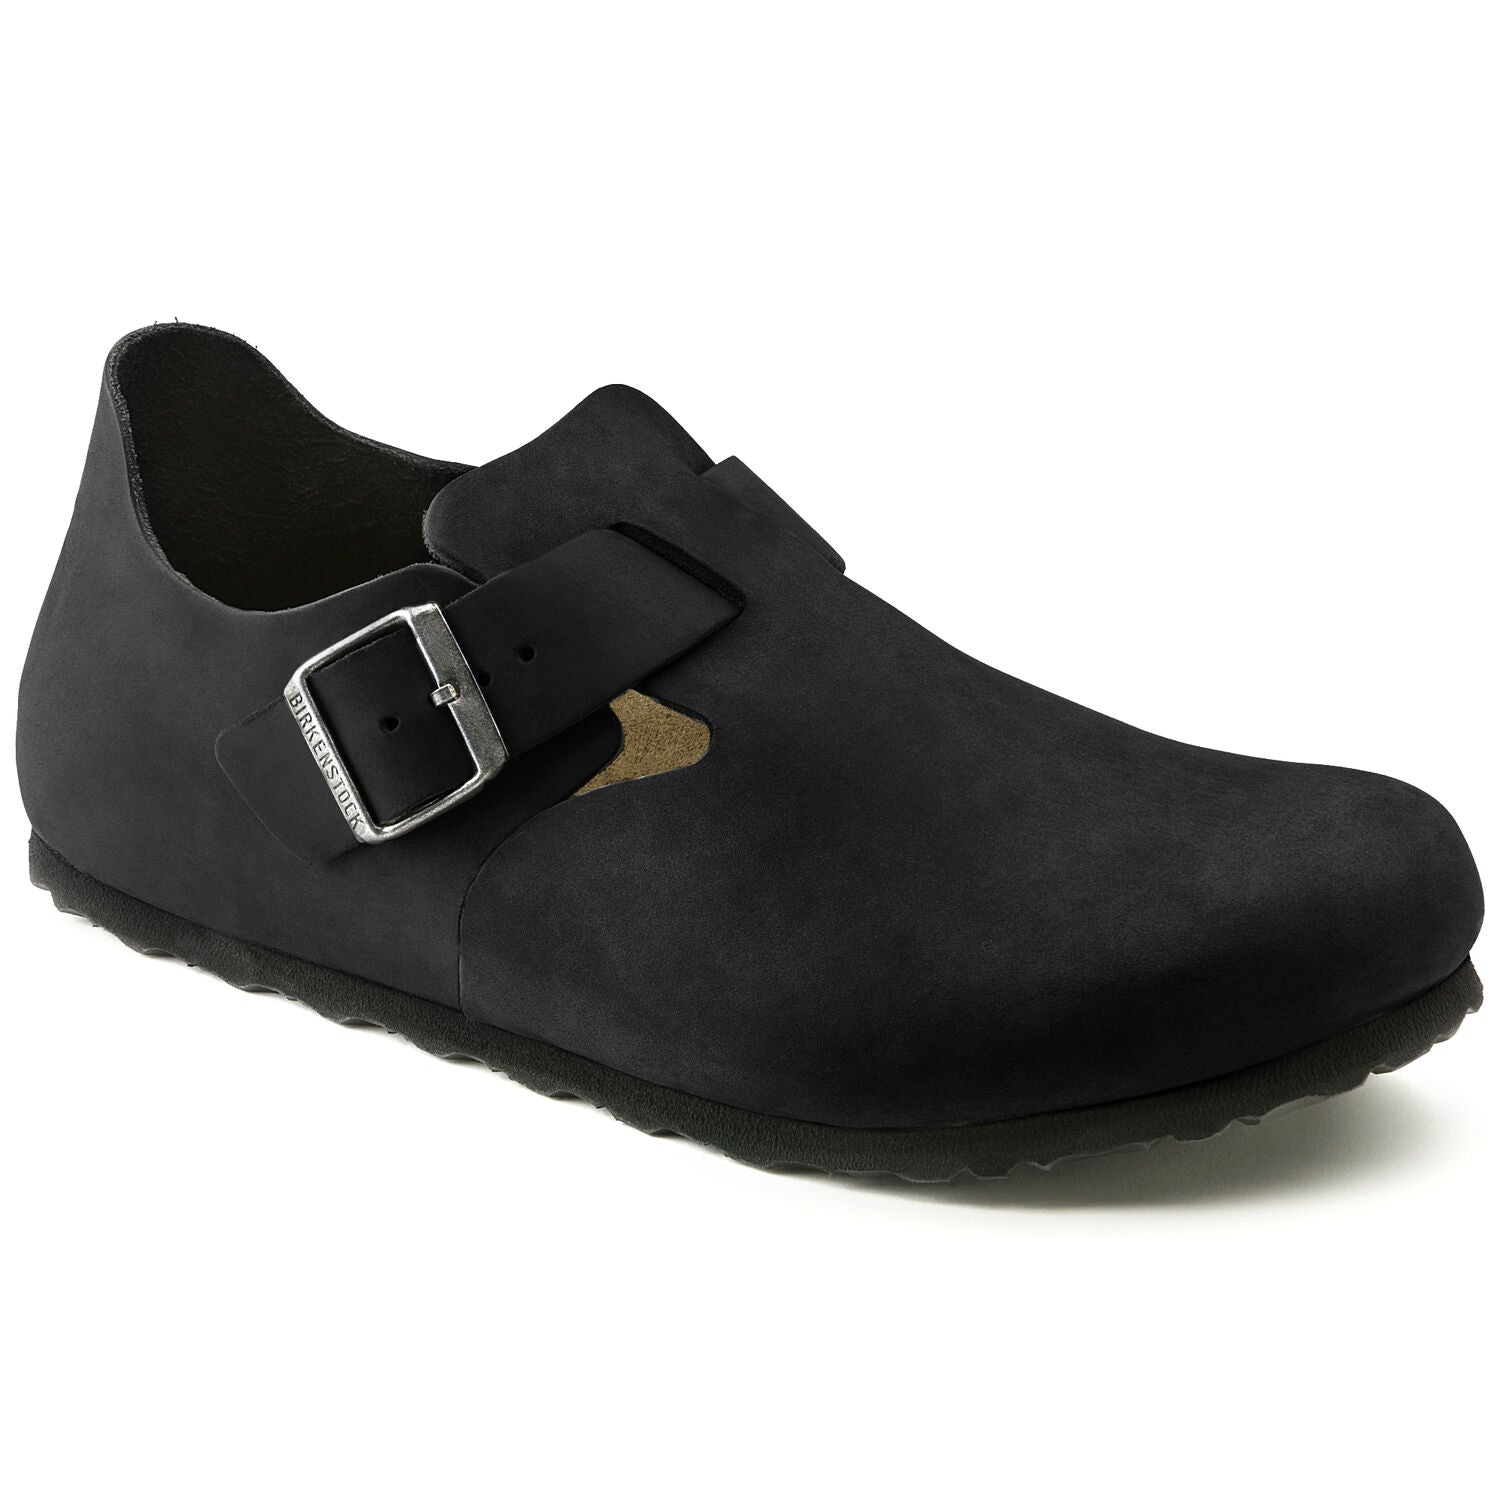 London Classic Footbed : Black Oiled